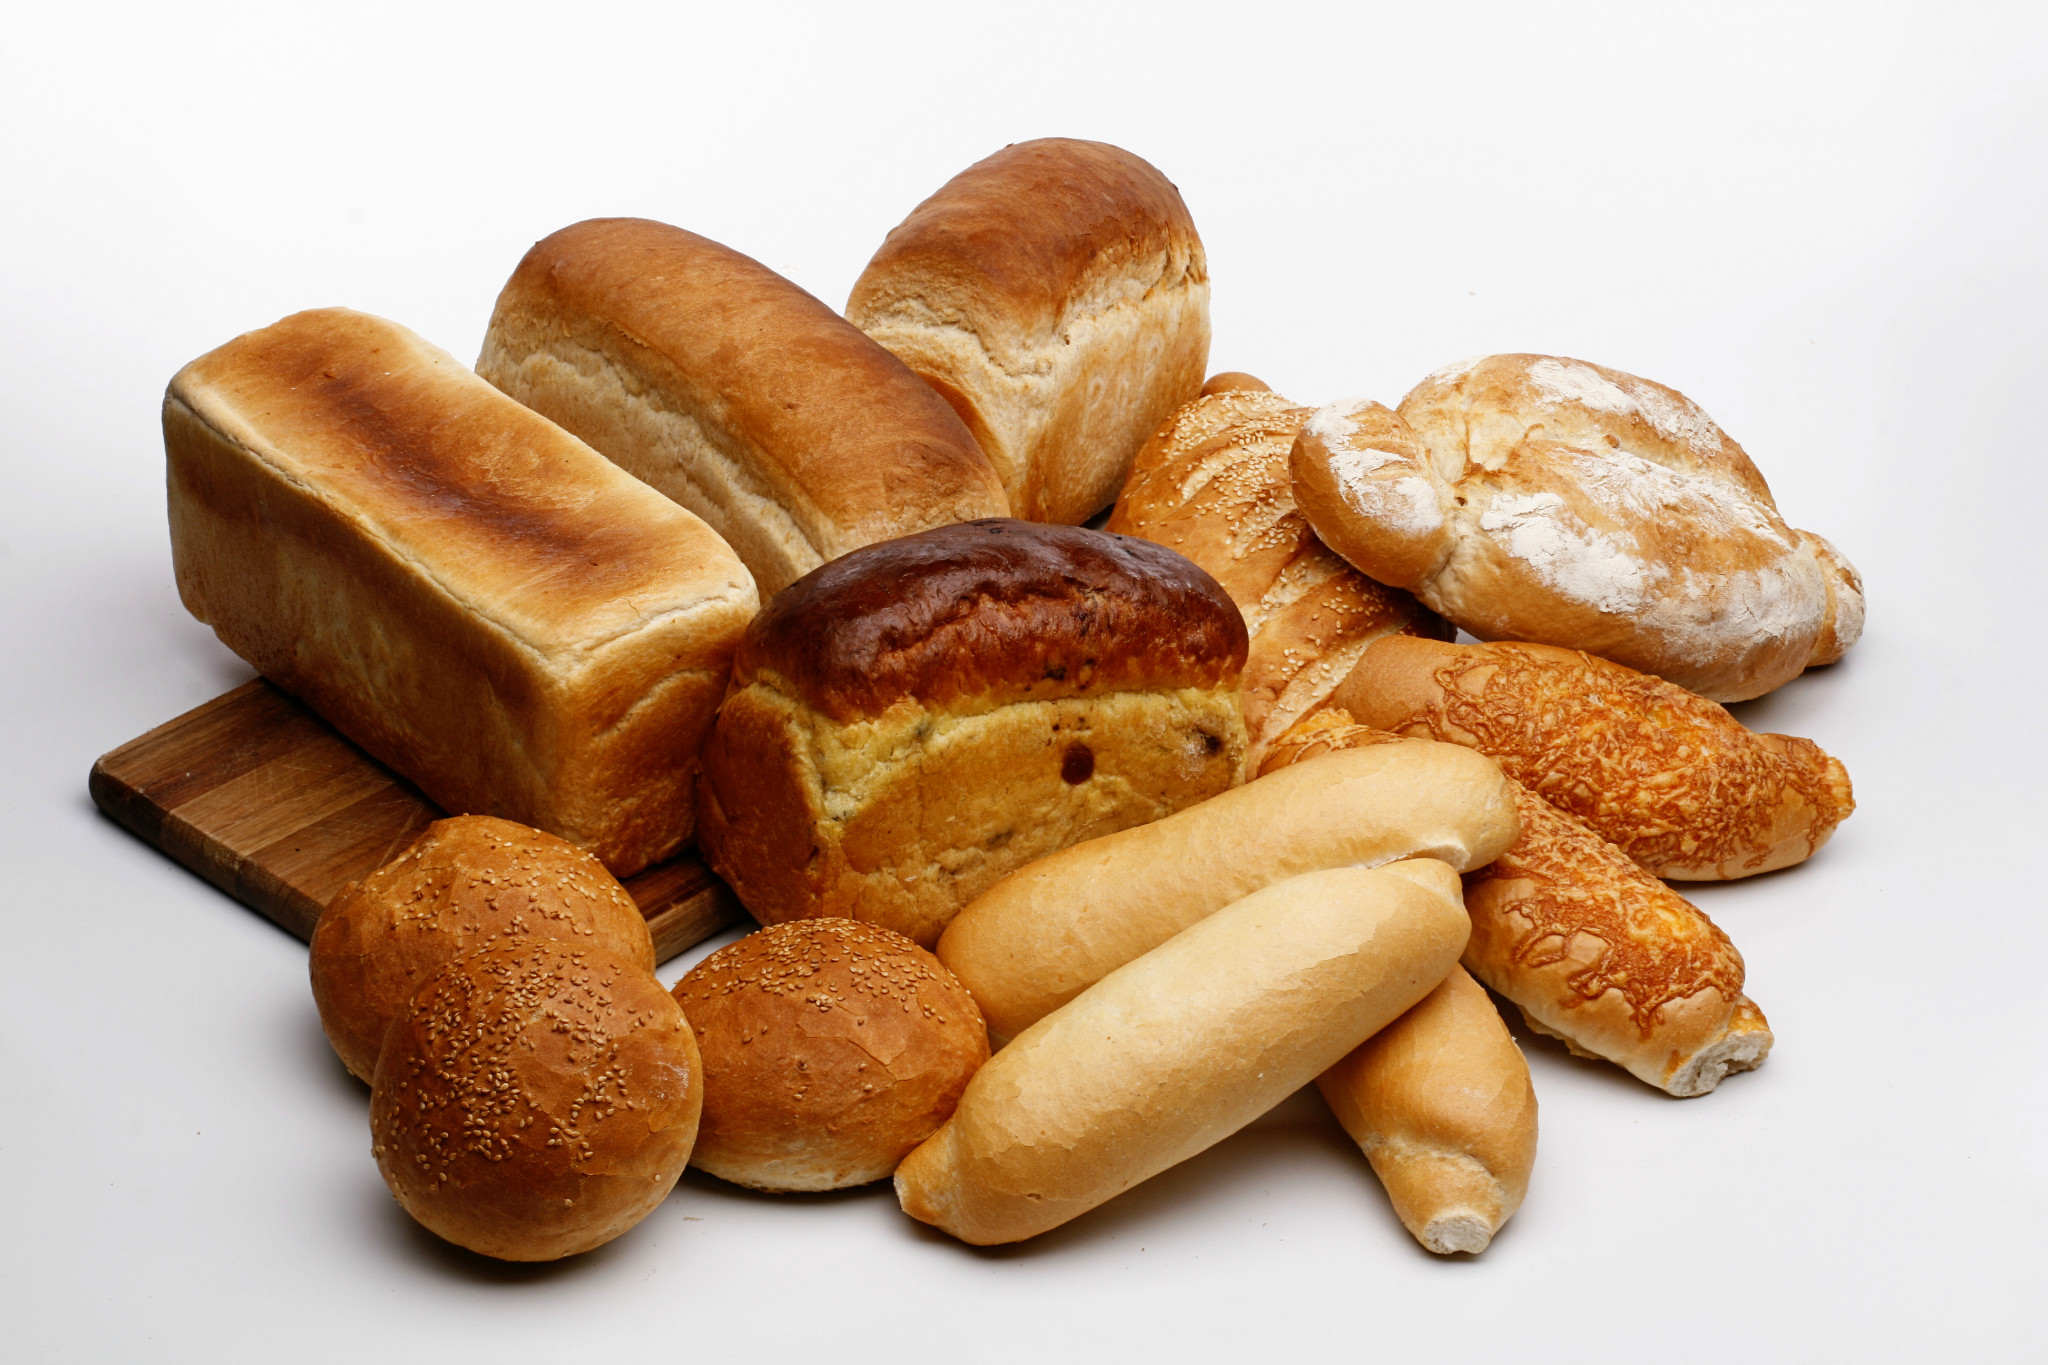 Frozen Bakery Products Market to Touch US$ 39.6 Billion by 2028, at a CAGR of 4.3% | IMARC Group